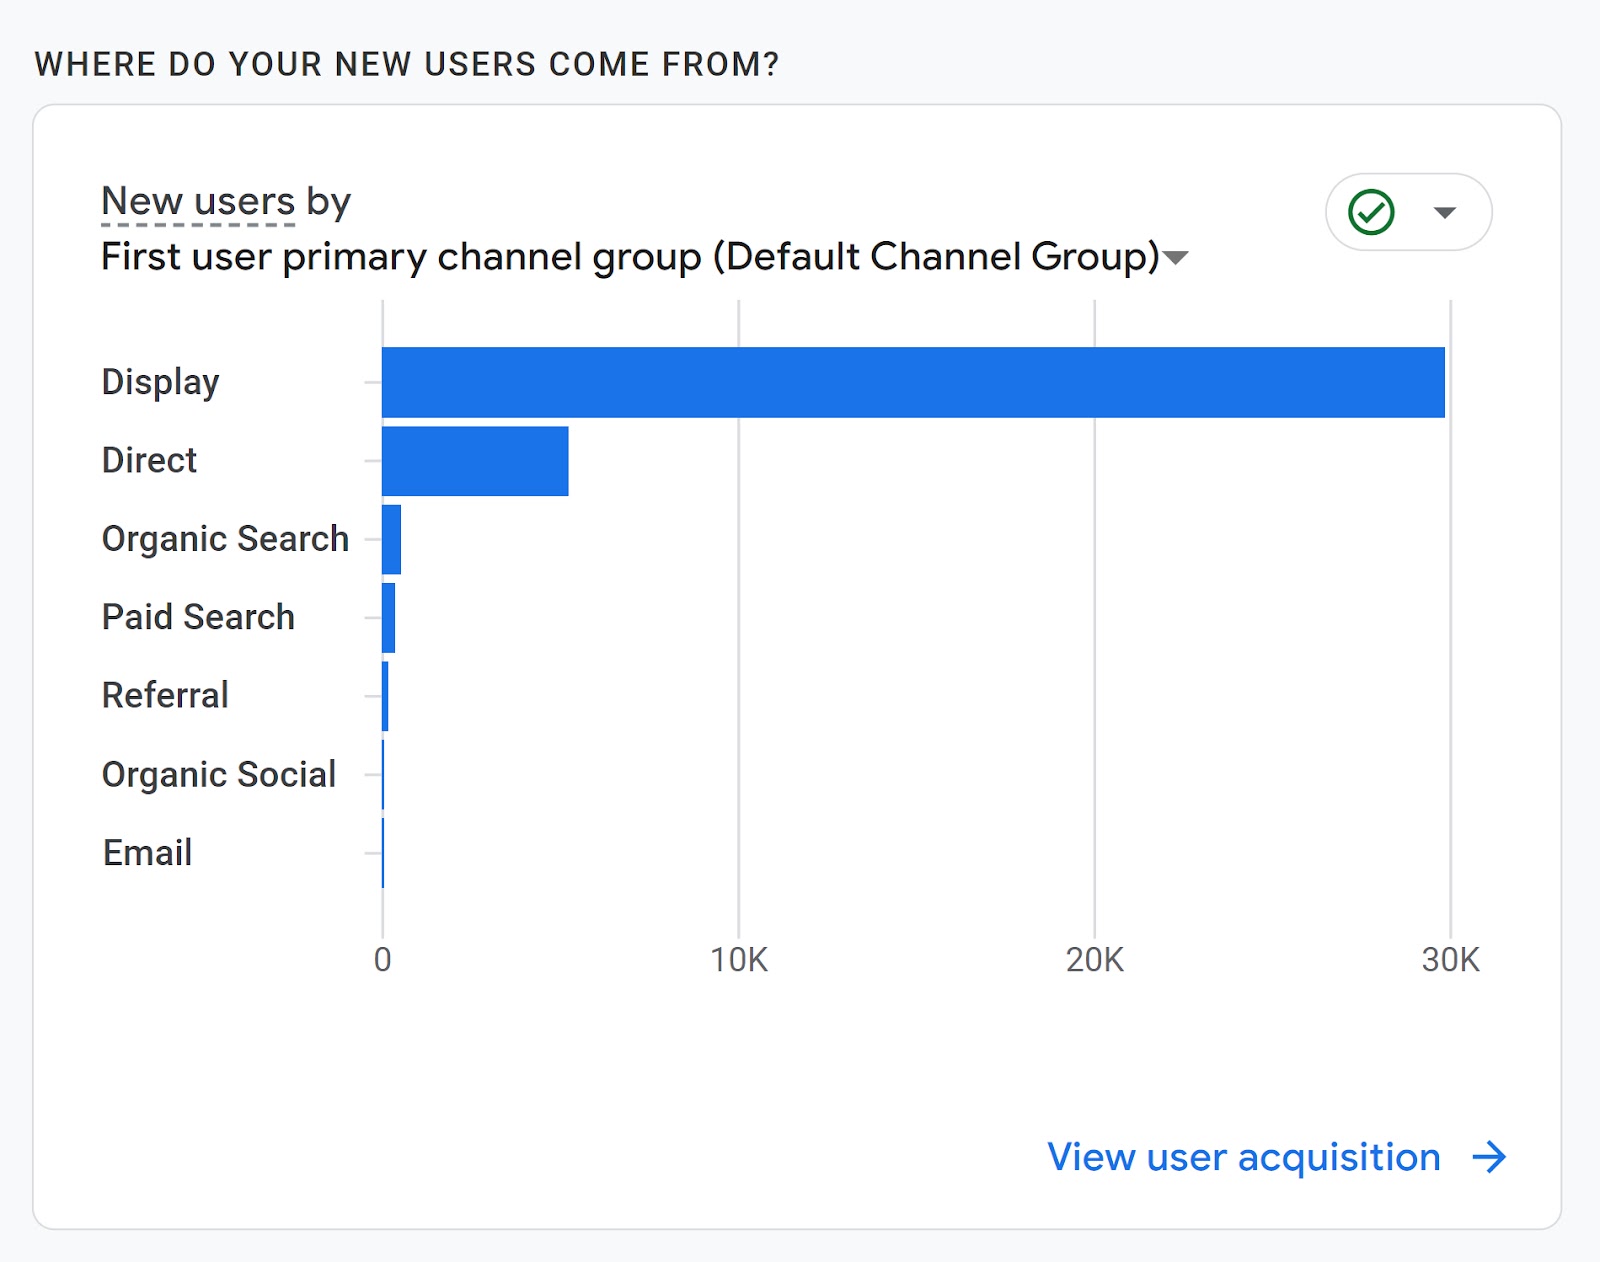 A Google Analytics 4 chart showing whether new website visitors came via display ads, direct or referral traffic, email, organic or paid search, or organic social media.